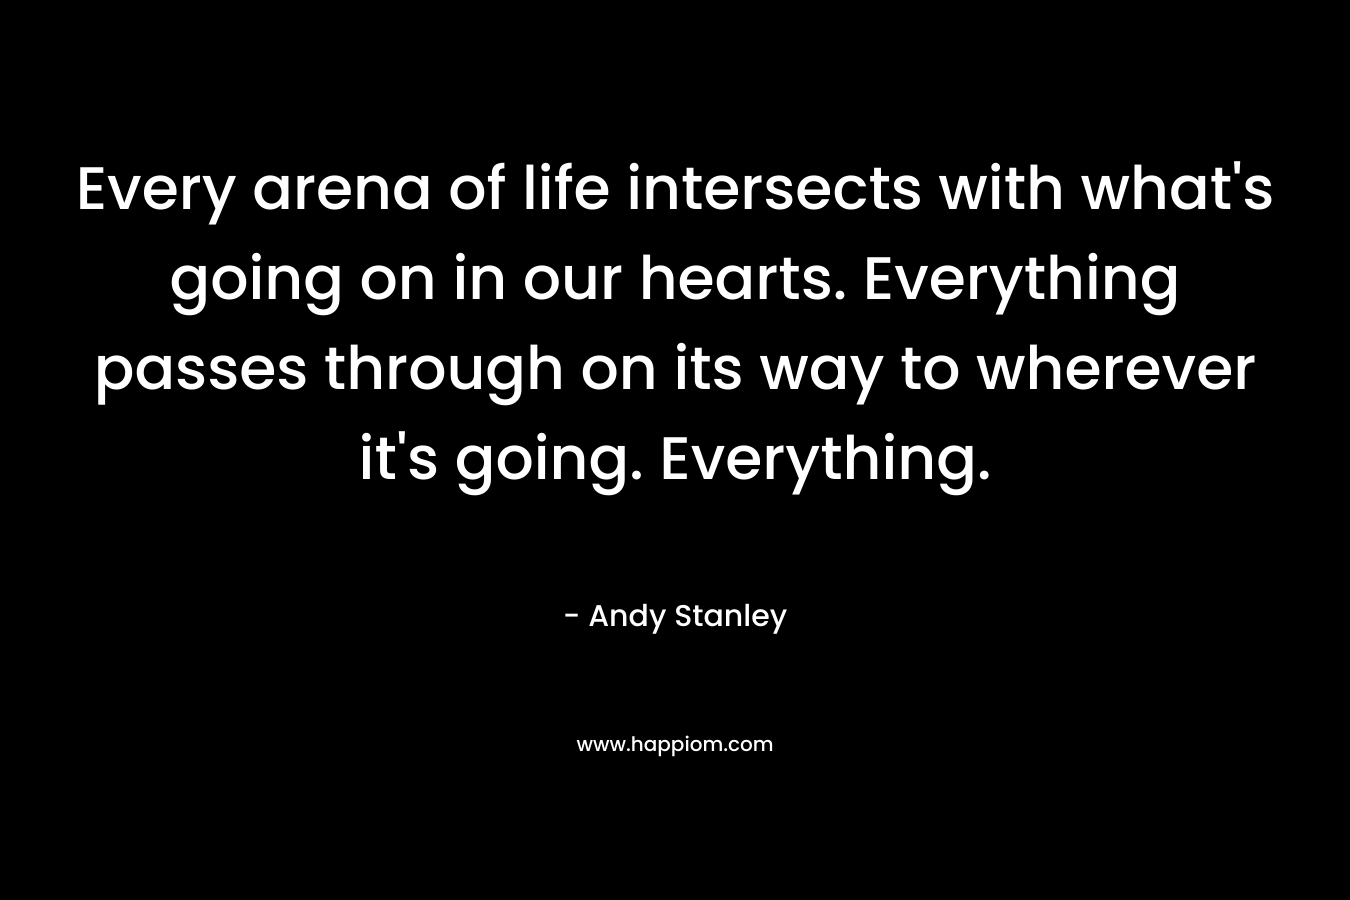 Every arena of life intersects with what’s going on in our hearts. Everything passes through on its way to wherever it’s going. Everything. – Andy Stanley